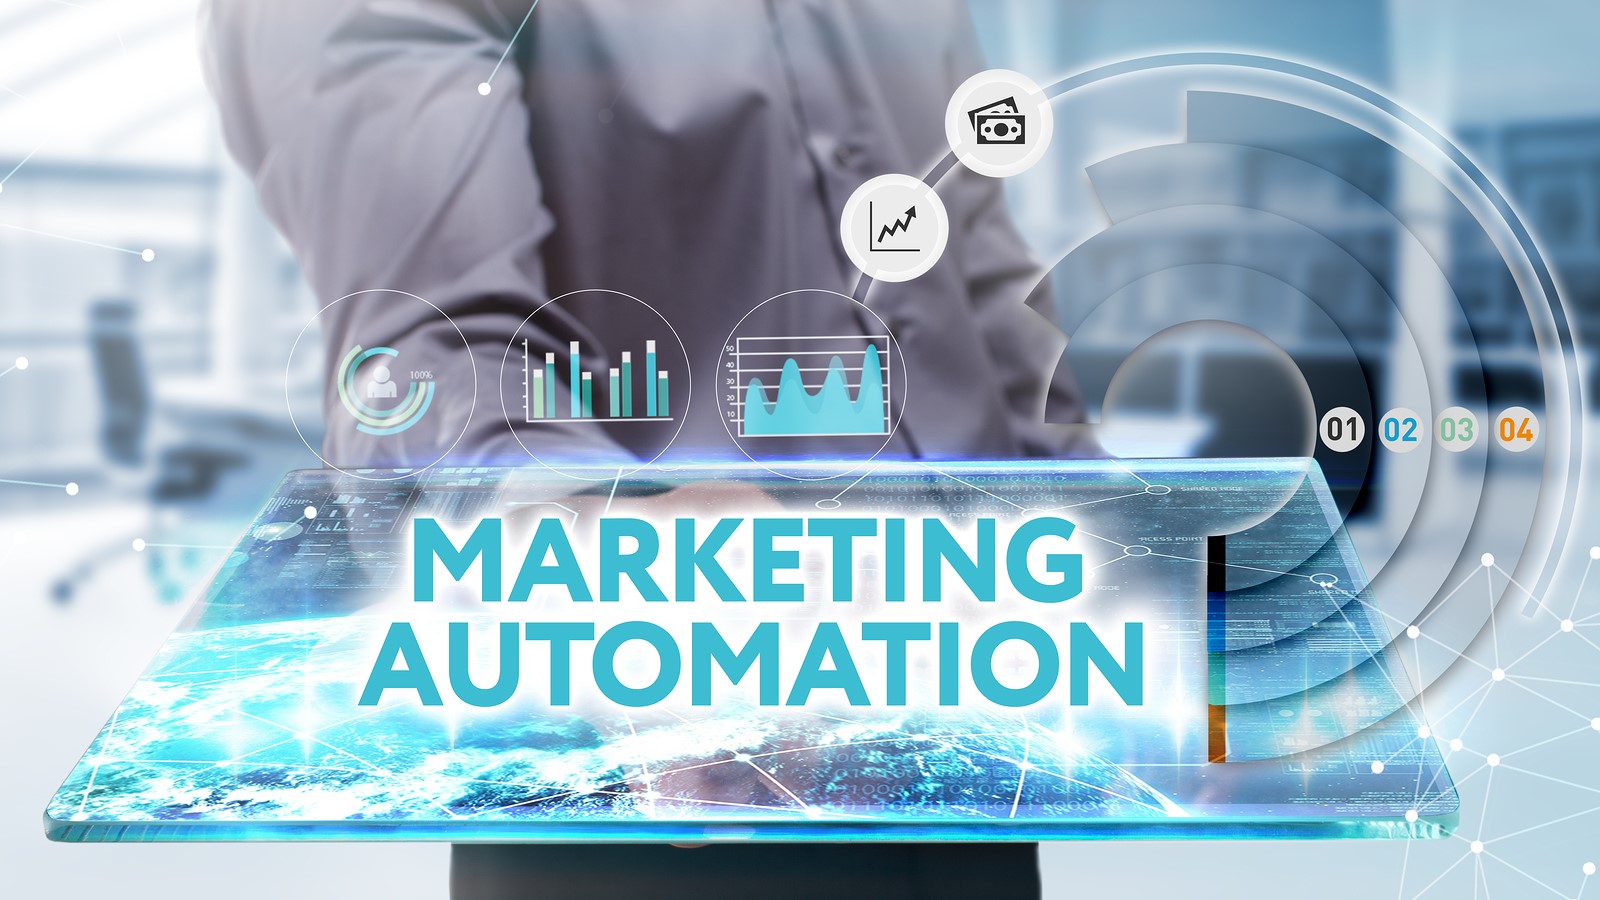 Marketing Automation In Today's Market - Marketing Automation Image Hd , HD Wallpaper & Backgrounds